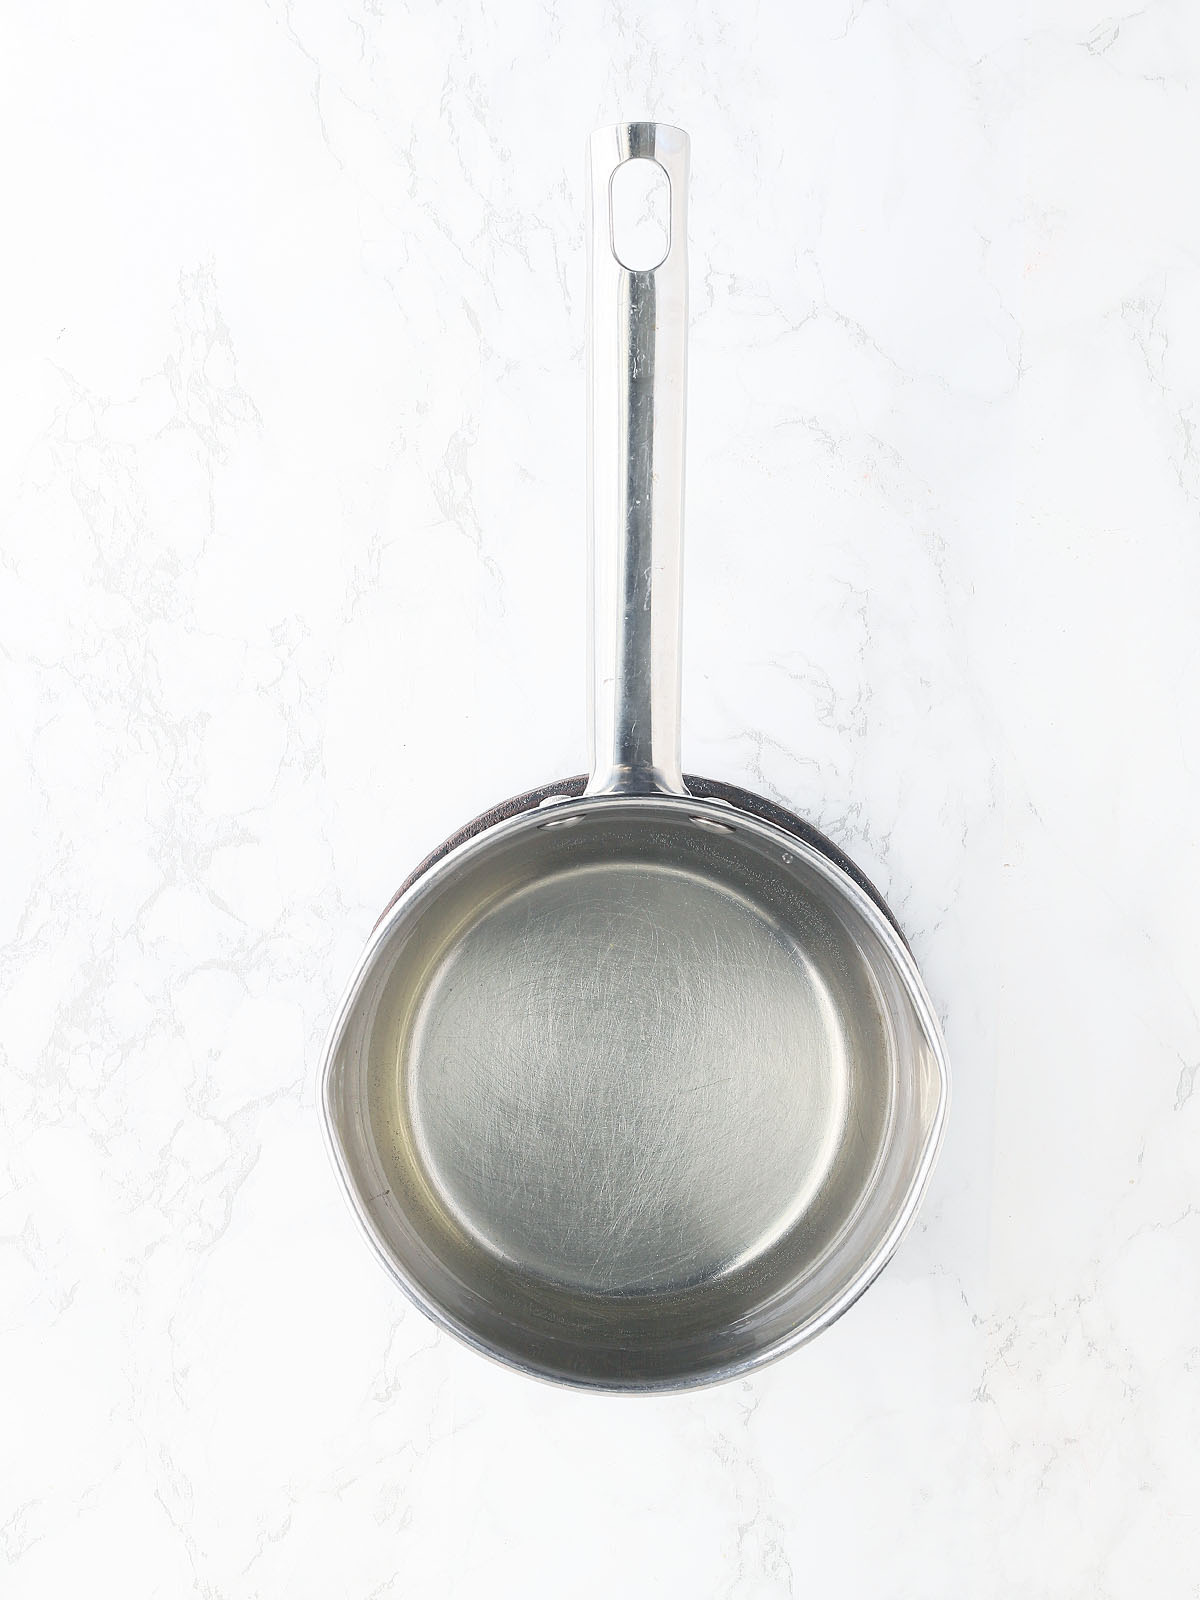 finished simple syrup in a stainless steel saucepan